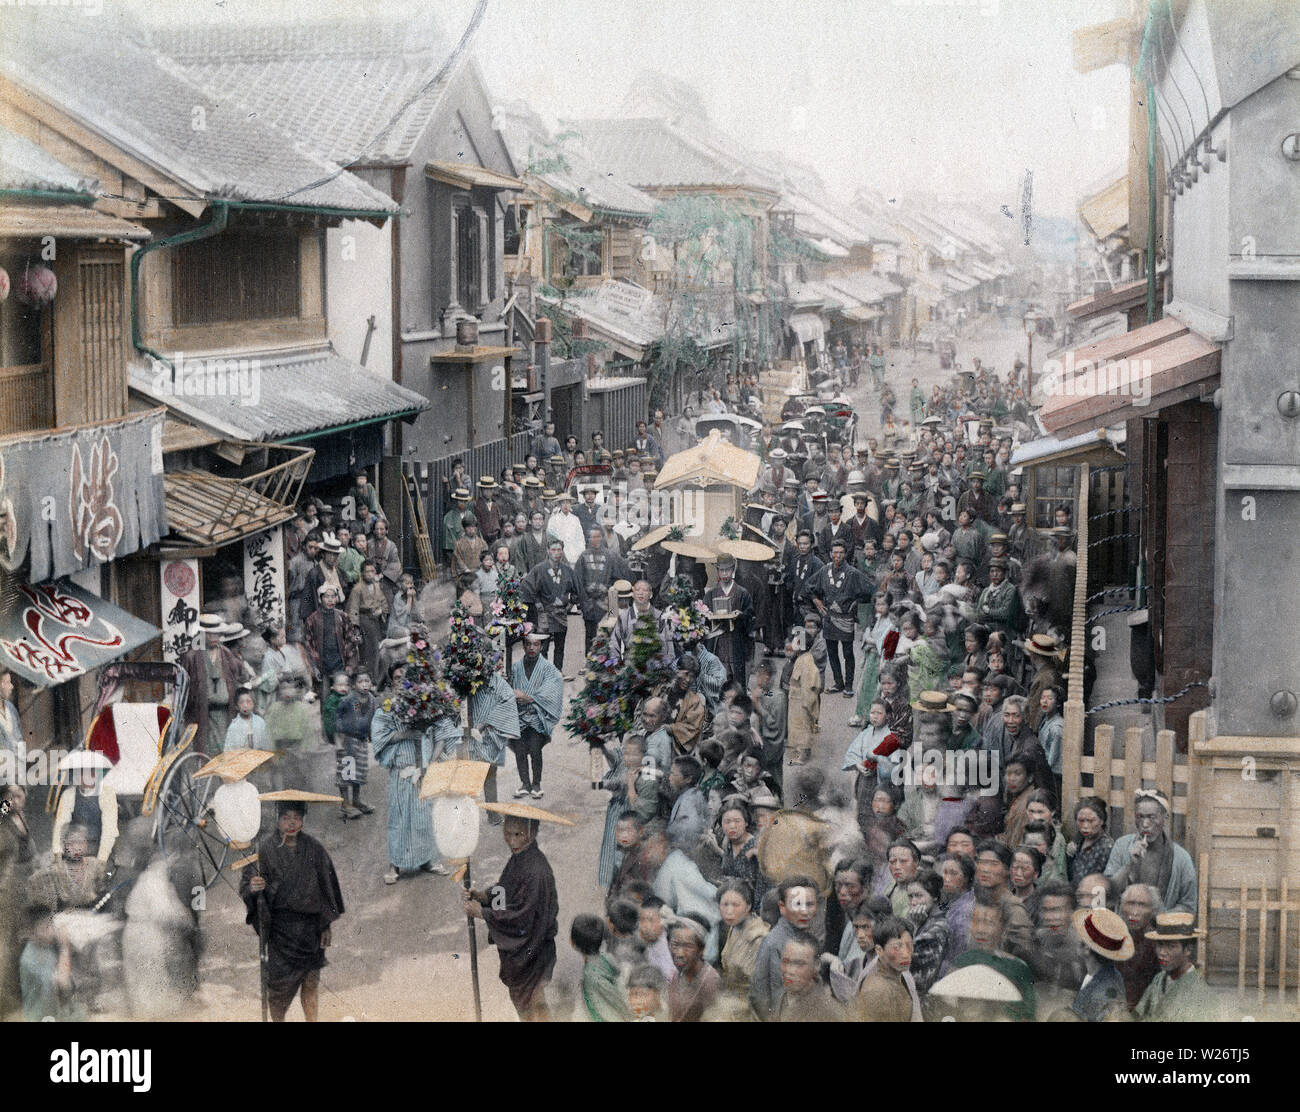 [ 1890s Japan - Japanese Funeral Procession ] —   A crowd gathers to watch a funeral procession.  19th century vintage albumen photograph. Stock Photo